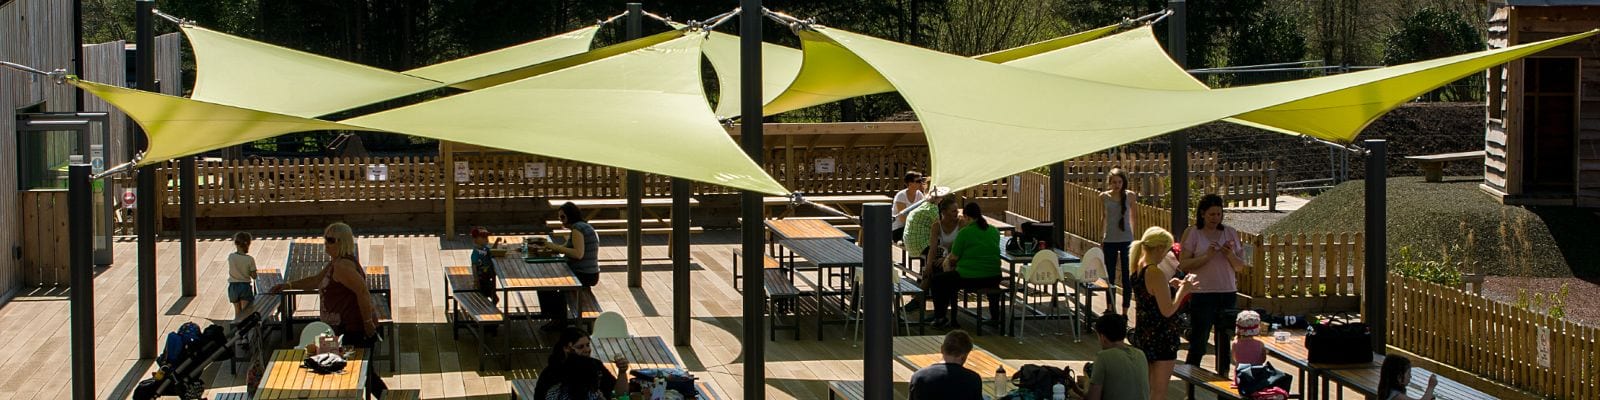 Outdoor sails we installed at The Chobham Adventure Farm